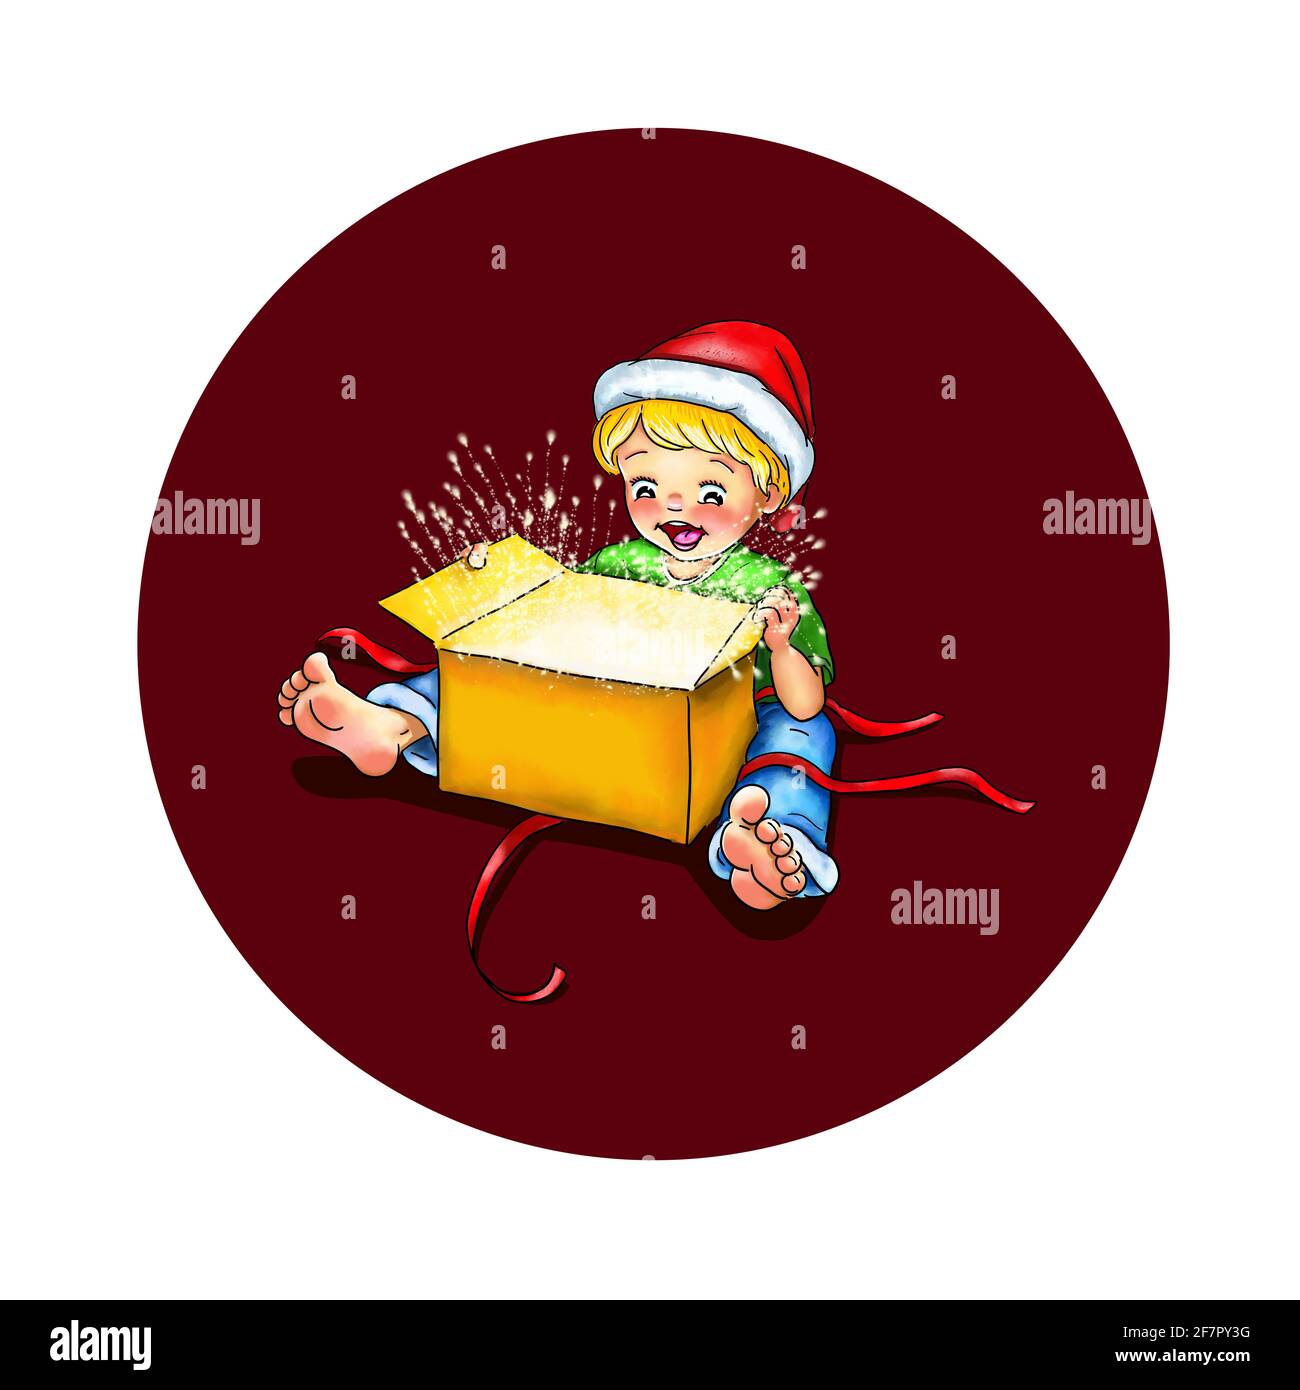 Toddler child boy with Santa hat sits barefoot with an unwrapped present in front of him shine fascination fascinated surprised joy laugh shine stars Stock Photo